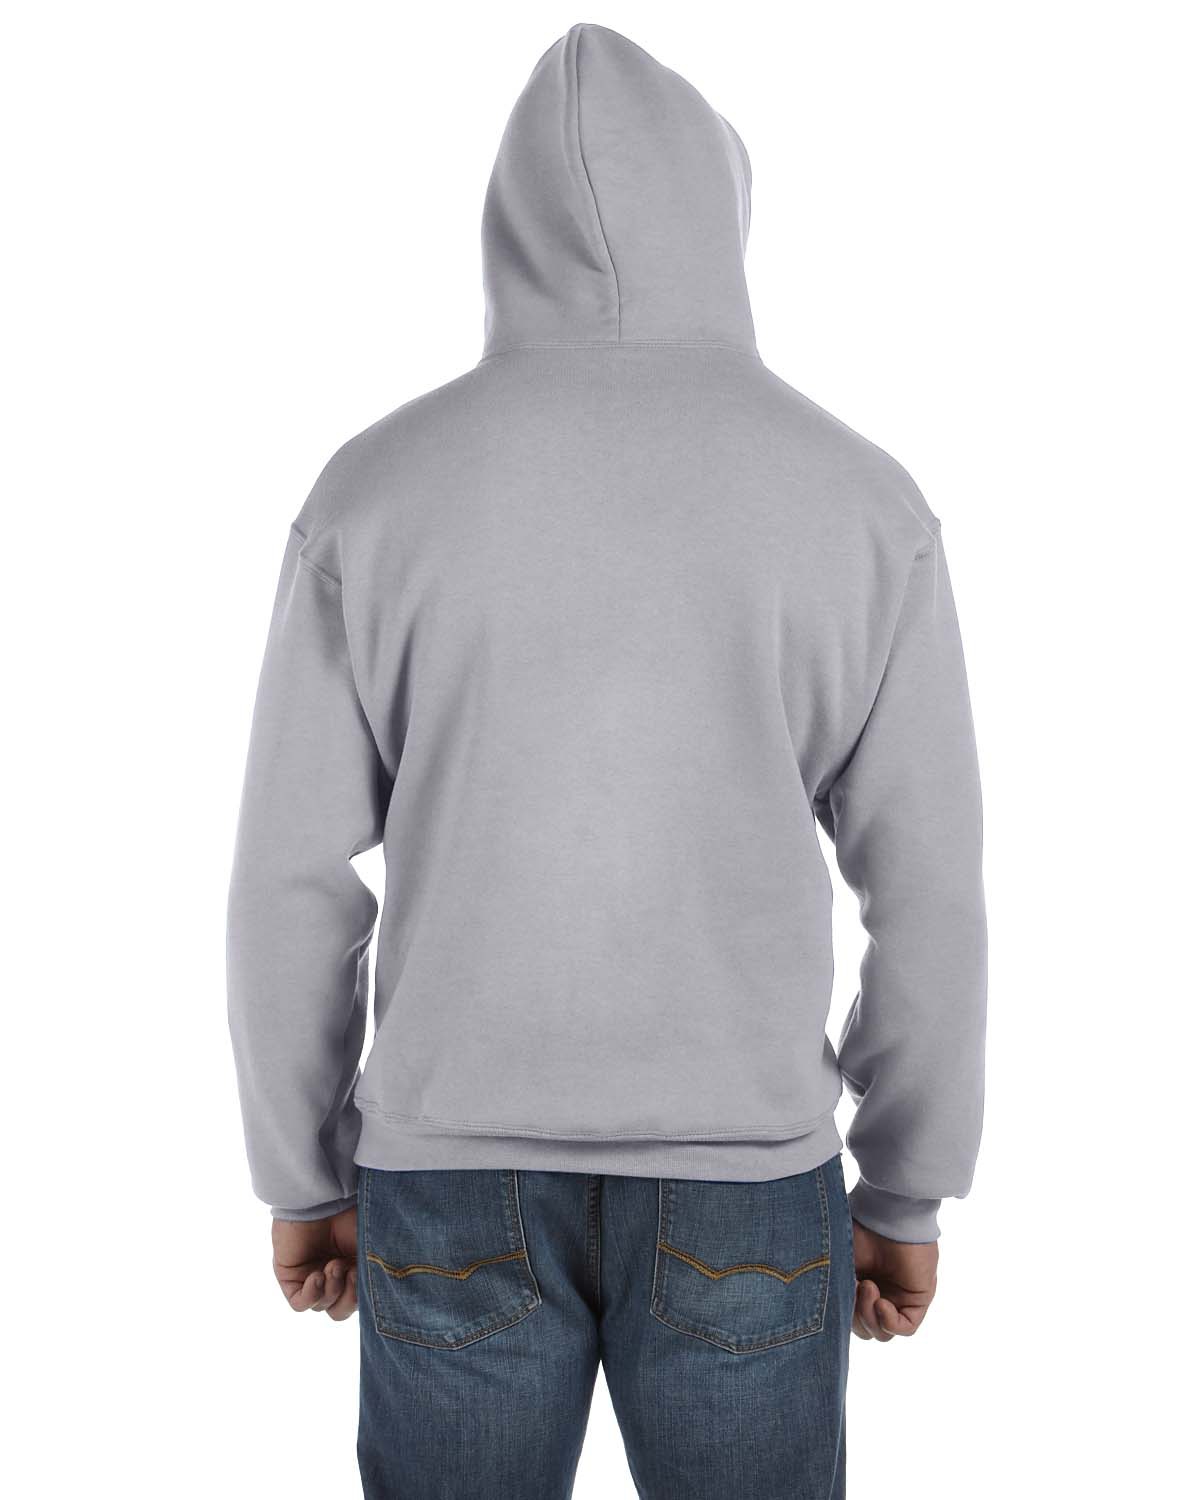 'Fruit of the Loom 82130 Adult SuperCotton Pullover Hood'